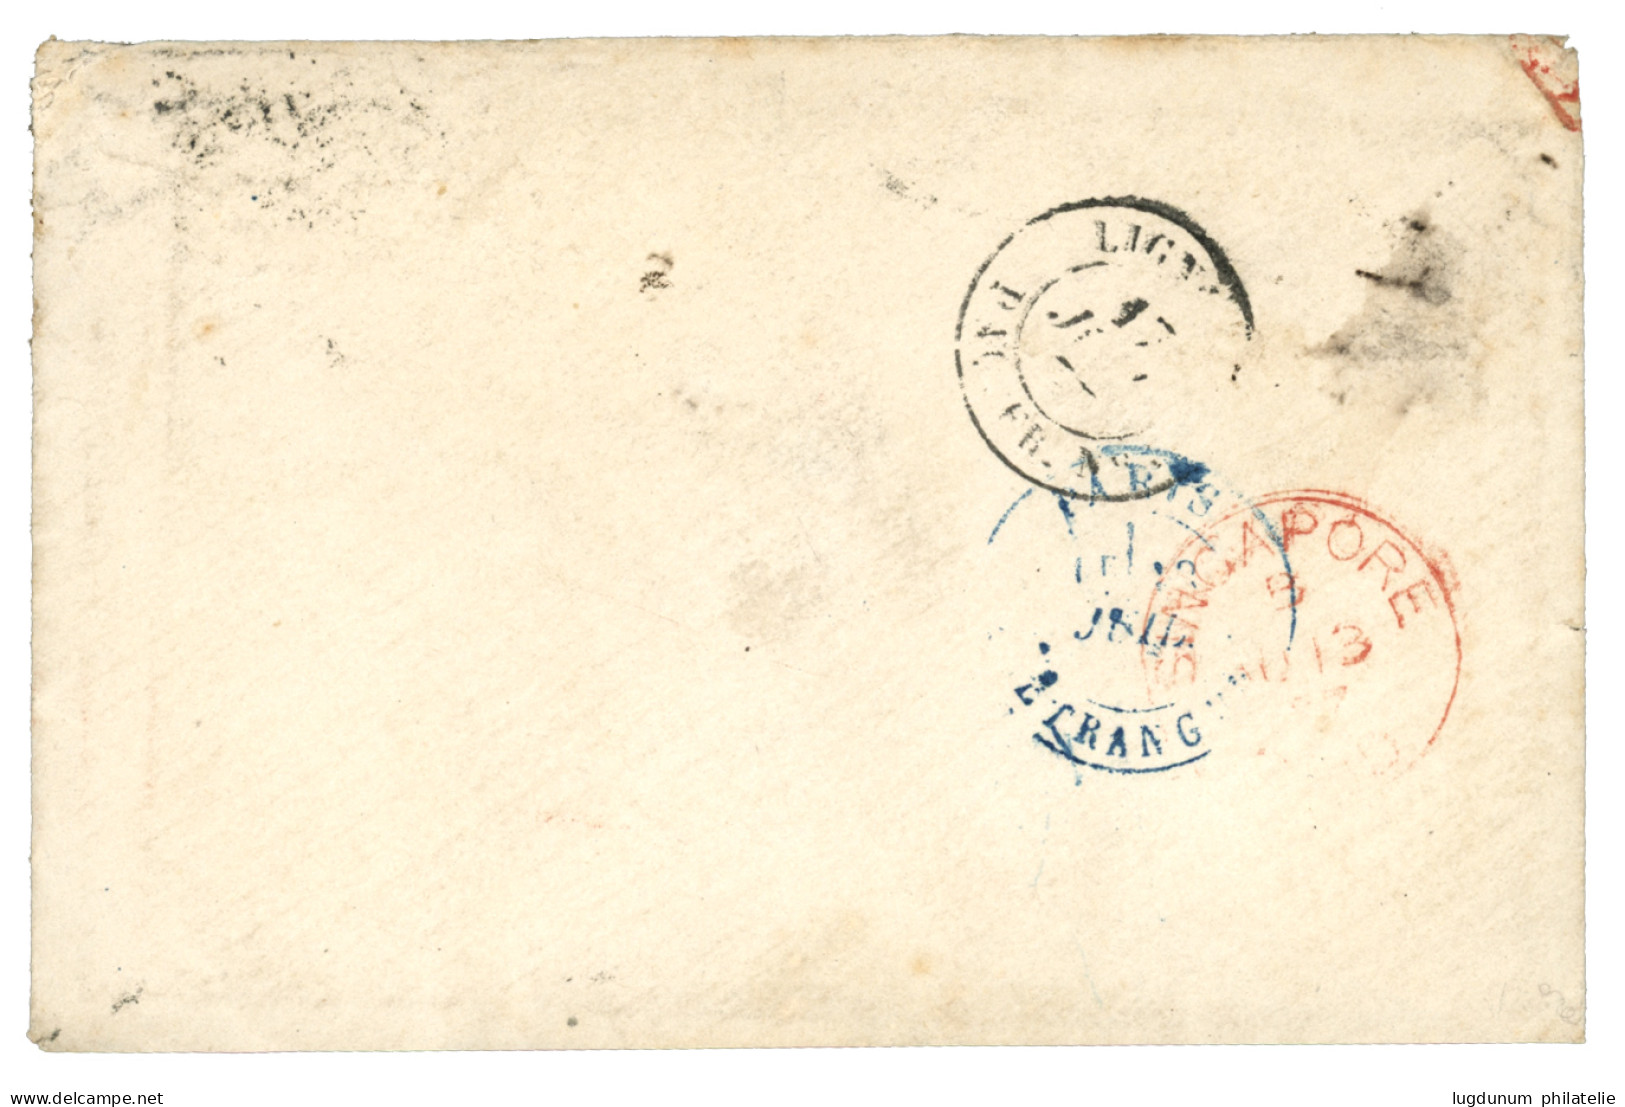 SIAM - PRE - U.P.U Mail : 1877 FRANCE 25c (x4) Canc. ST QUENTIN On Envelope To BANGKOK (SIAM). Verso, SINGAPORE In Red.  - 1849-1876: Classic Period